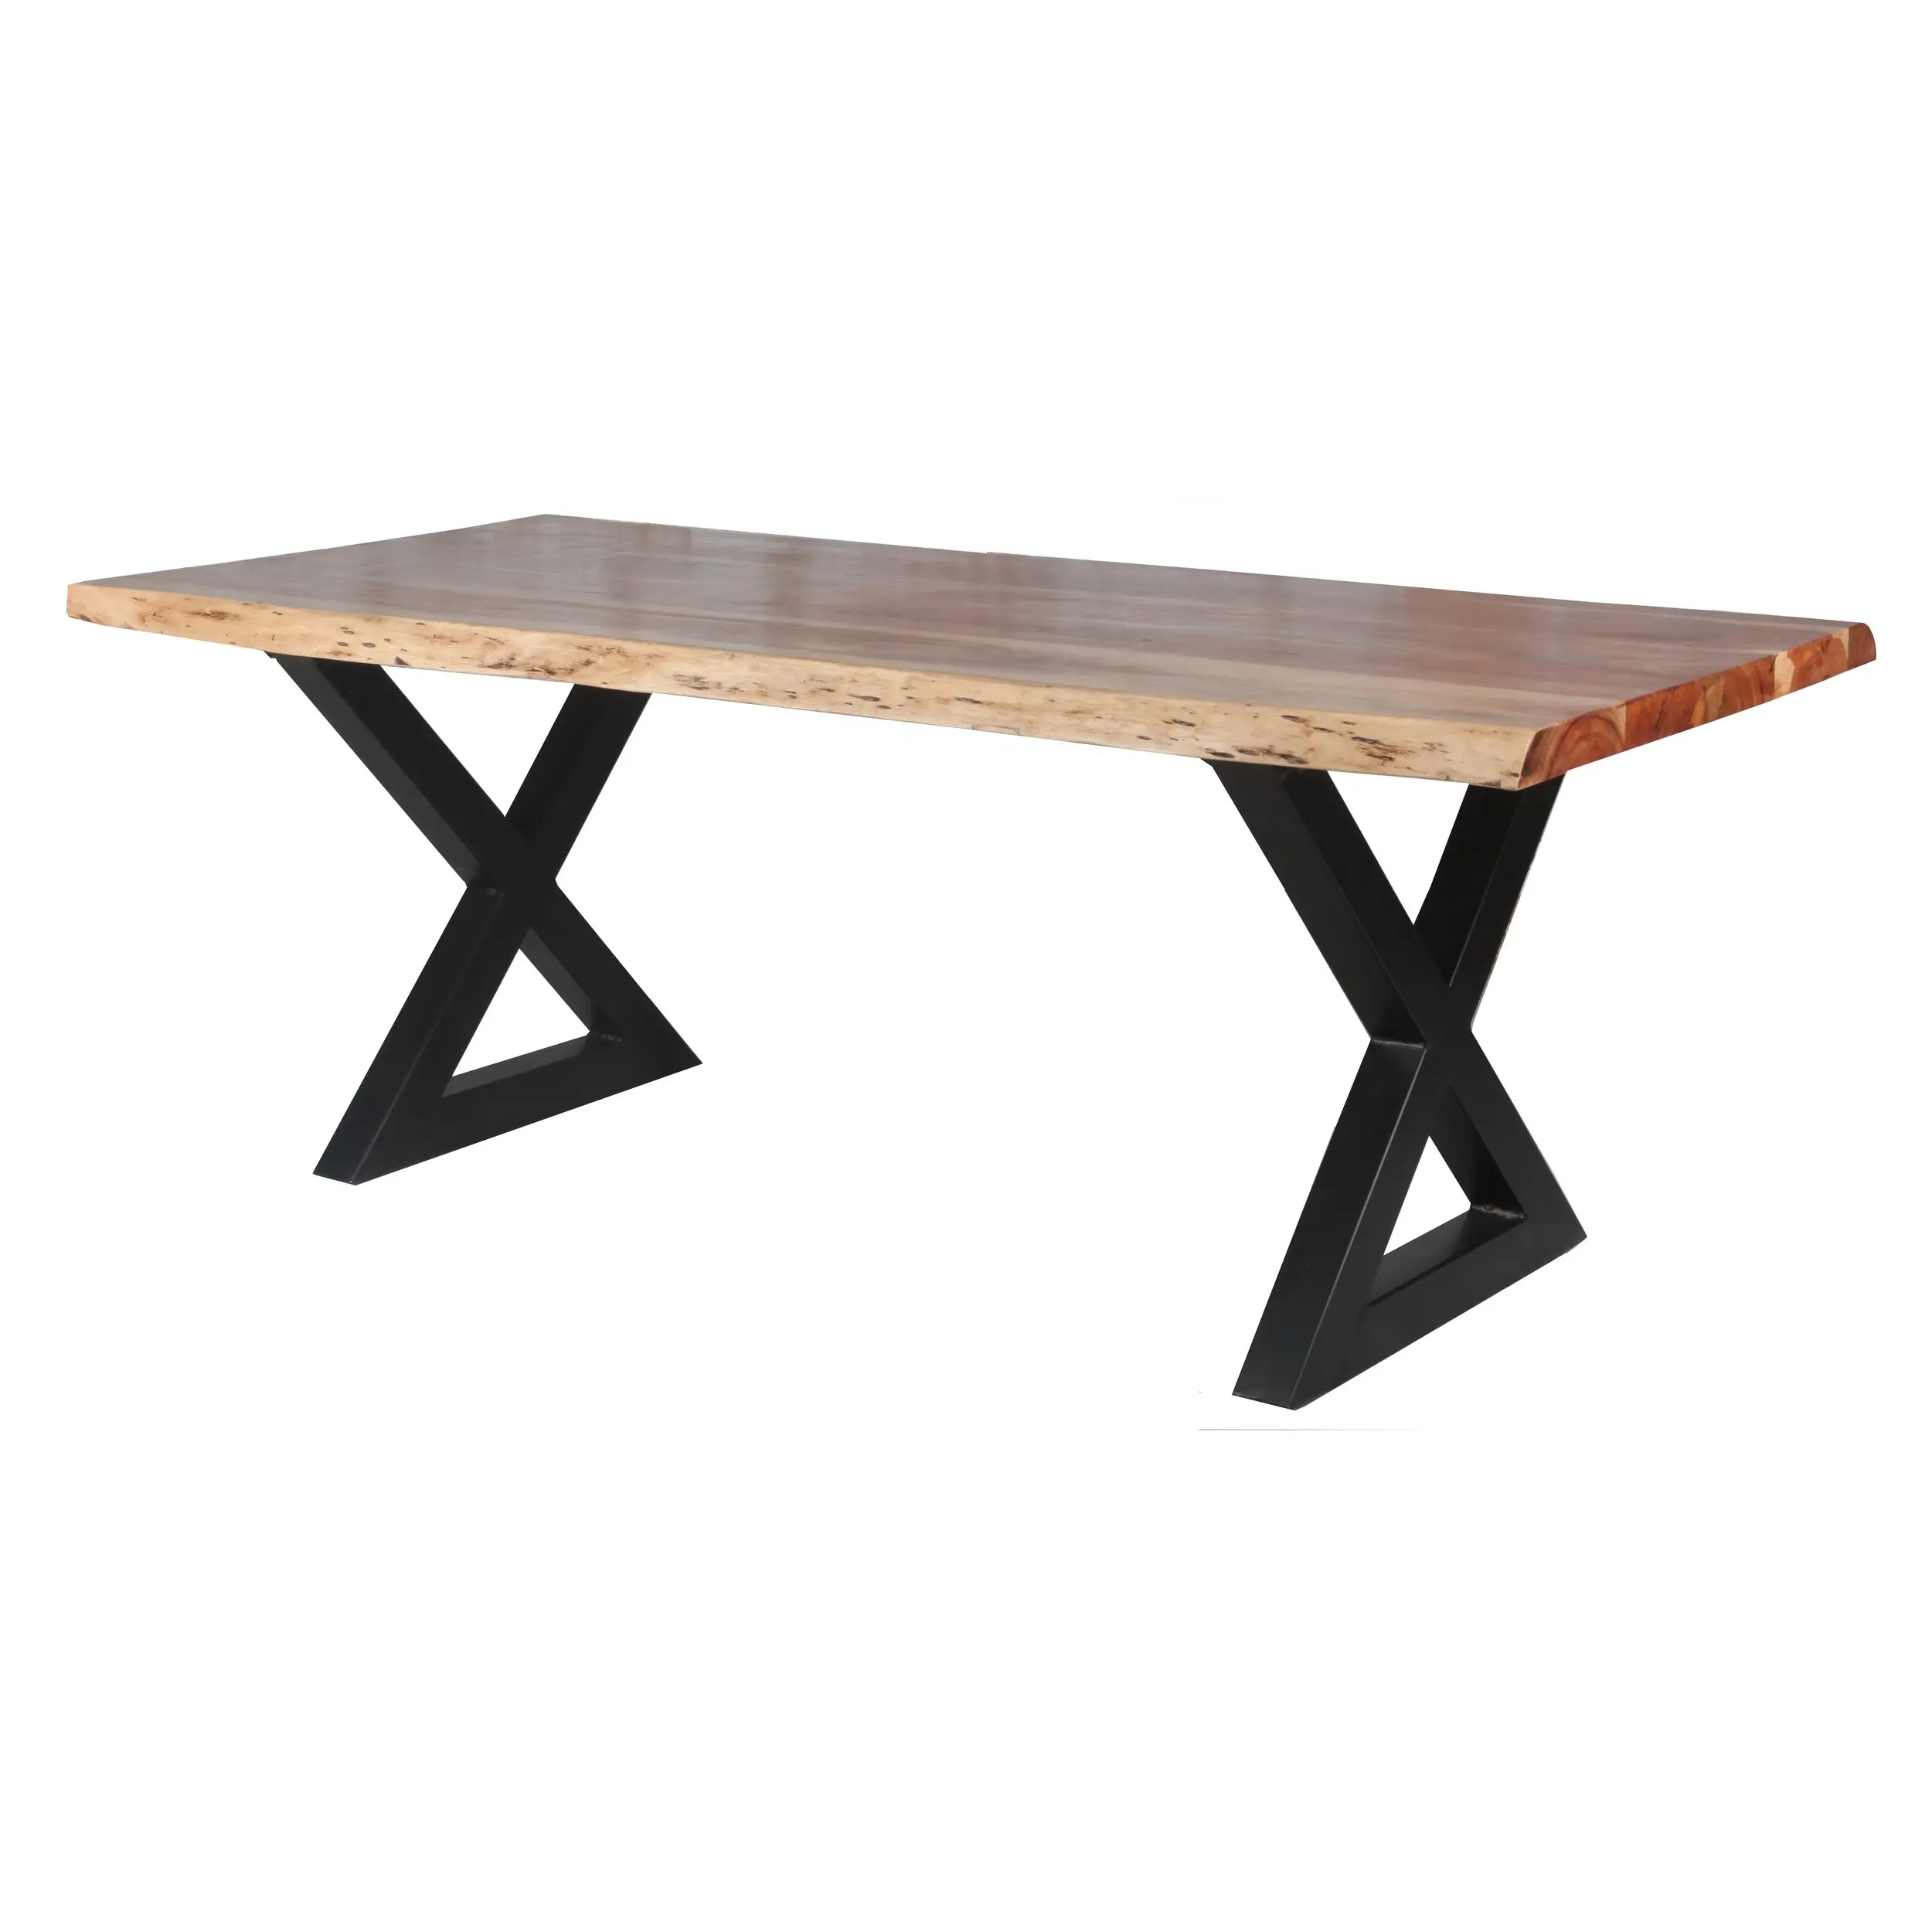 LIVE EDGE INDUSTRIAL DINING TABLE 2020, RESTAURANT FURNITURE